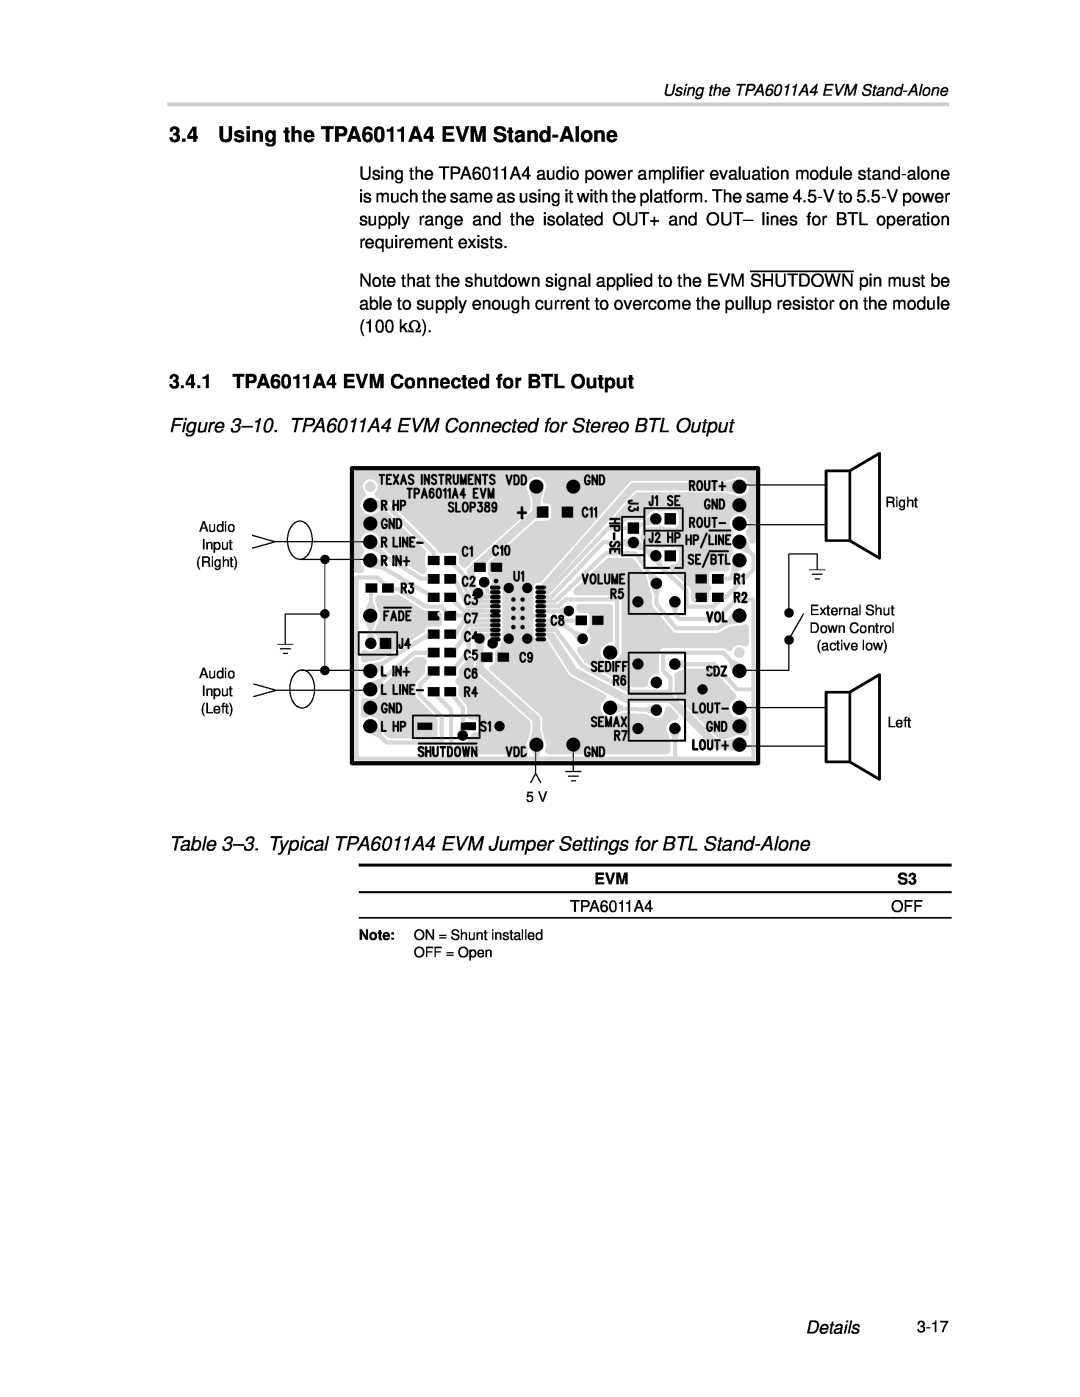 Texas Instruments SLOU121 manual Using the TPA6011A4 EVM Stand-Alone, 3.4.1TPA6011A4 EVM Connected for BTL Output 